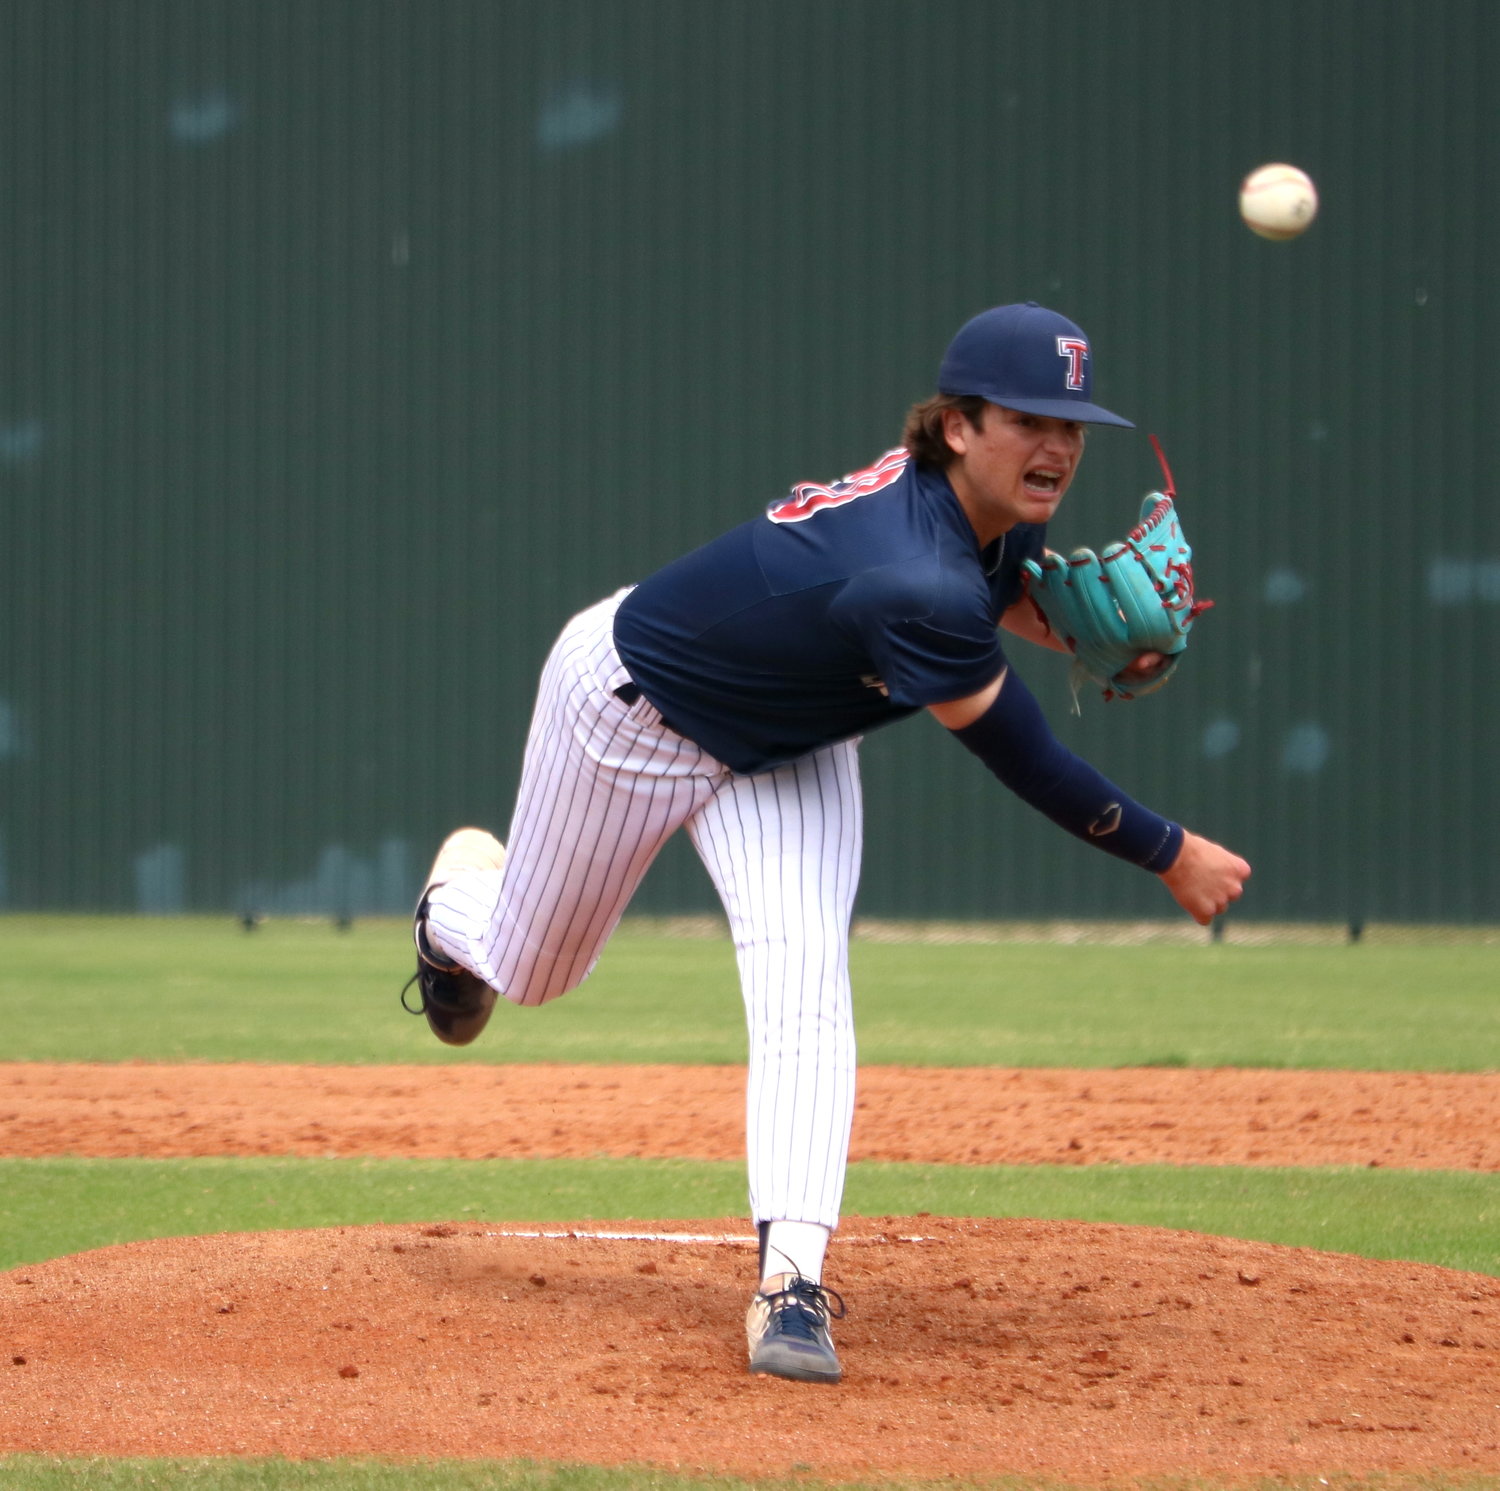 Gavin Brewer pitches during a game between Tompkins and Cinco Ranch at the Cinco Ranch baseball field.